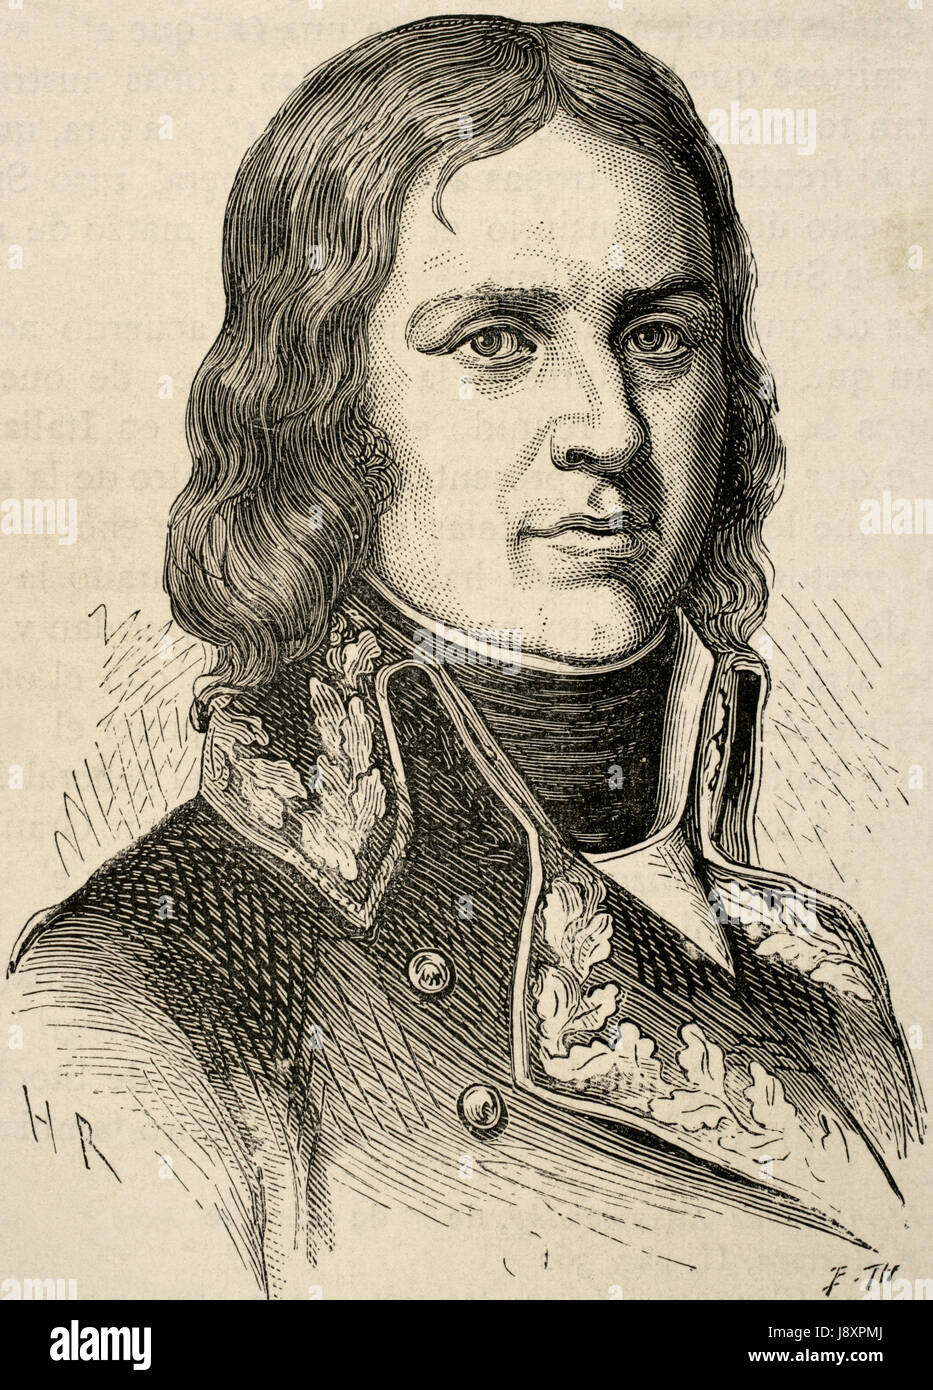 Jean Etienne Championnet (1762-1800). Military and French politician. Portrait. Engraving by E. Thiers. 'Historia de Francia', 1881. Stock Photo